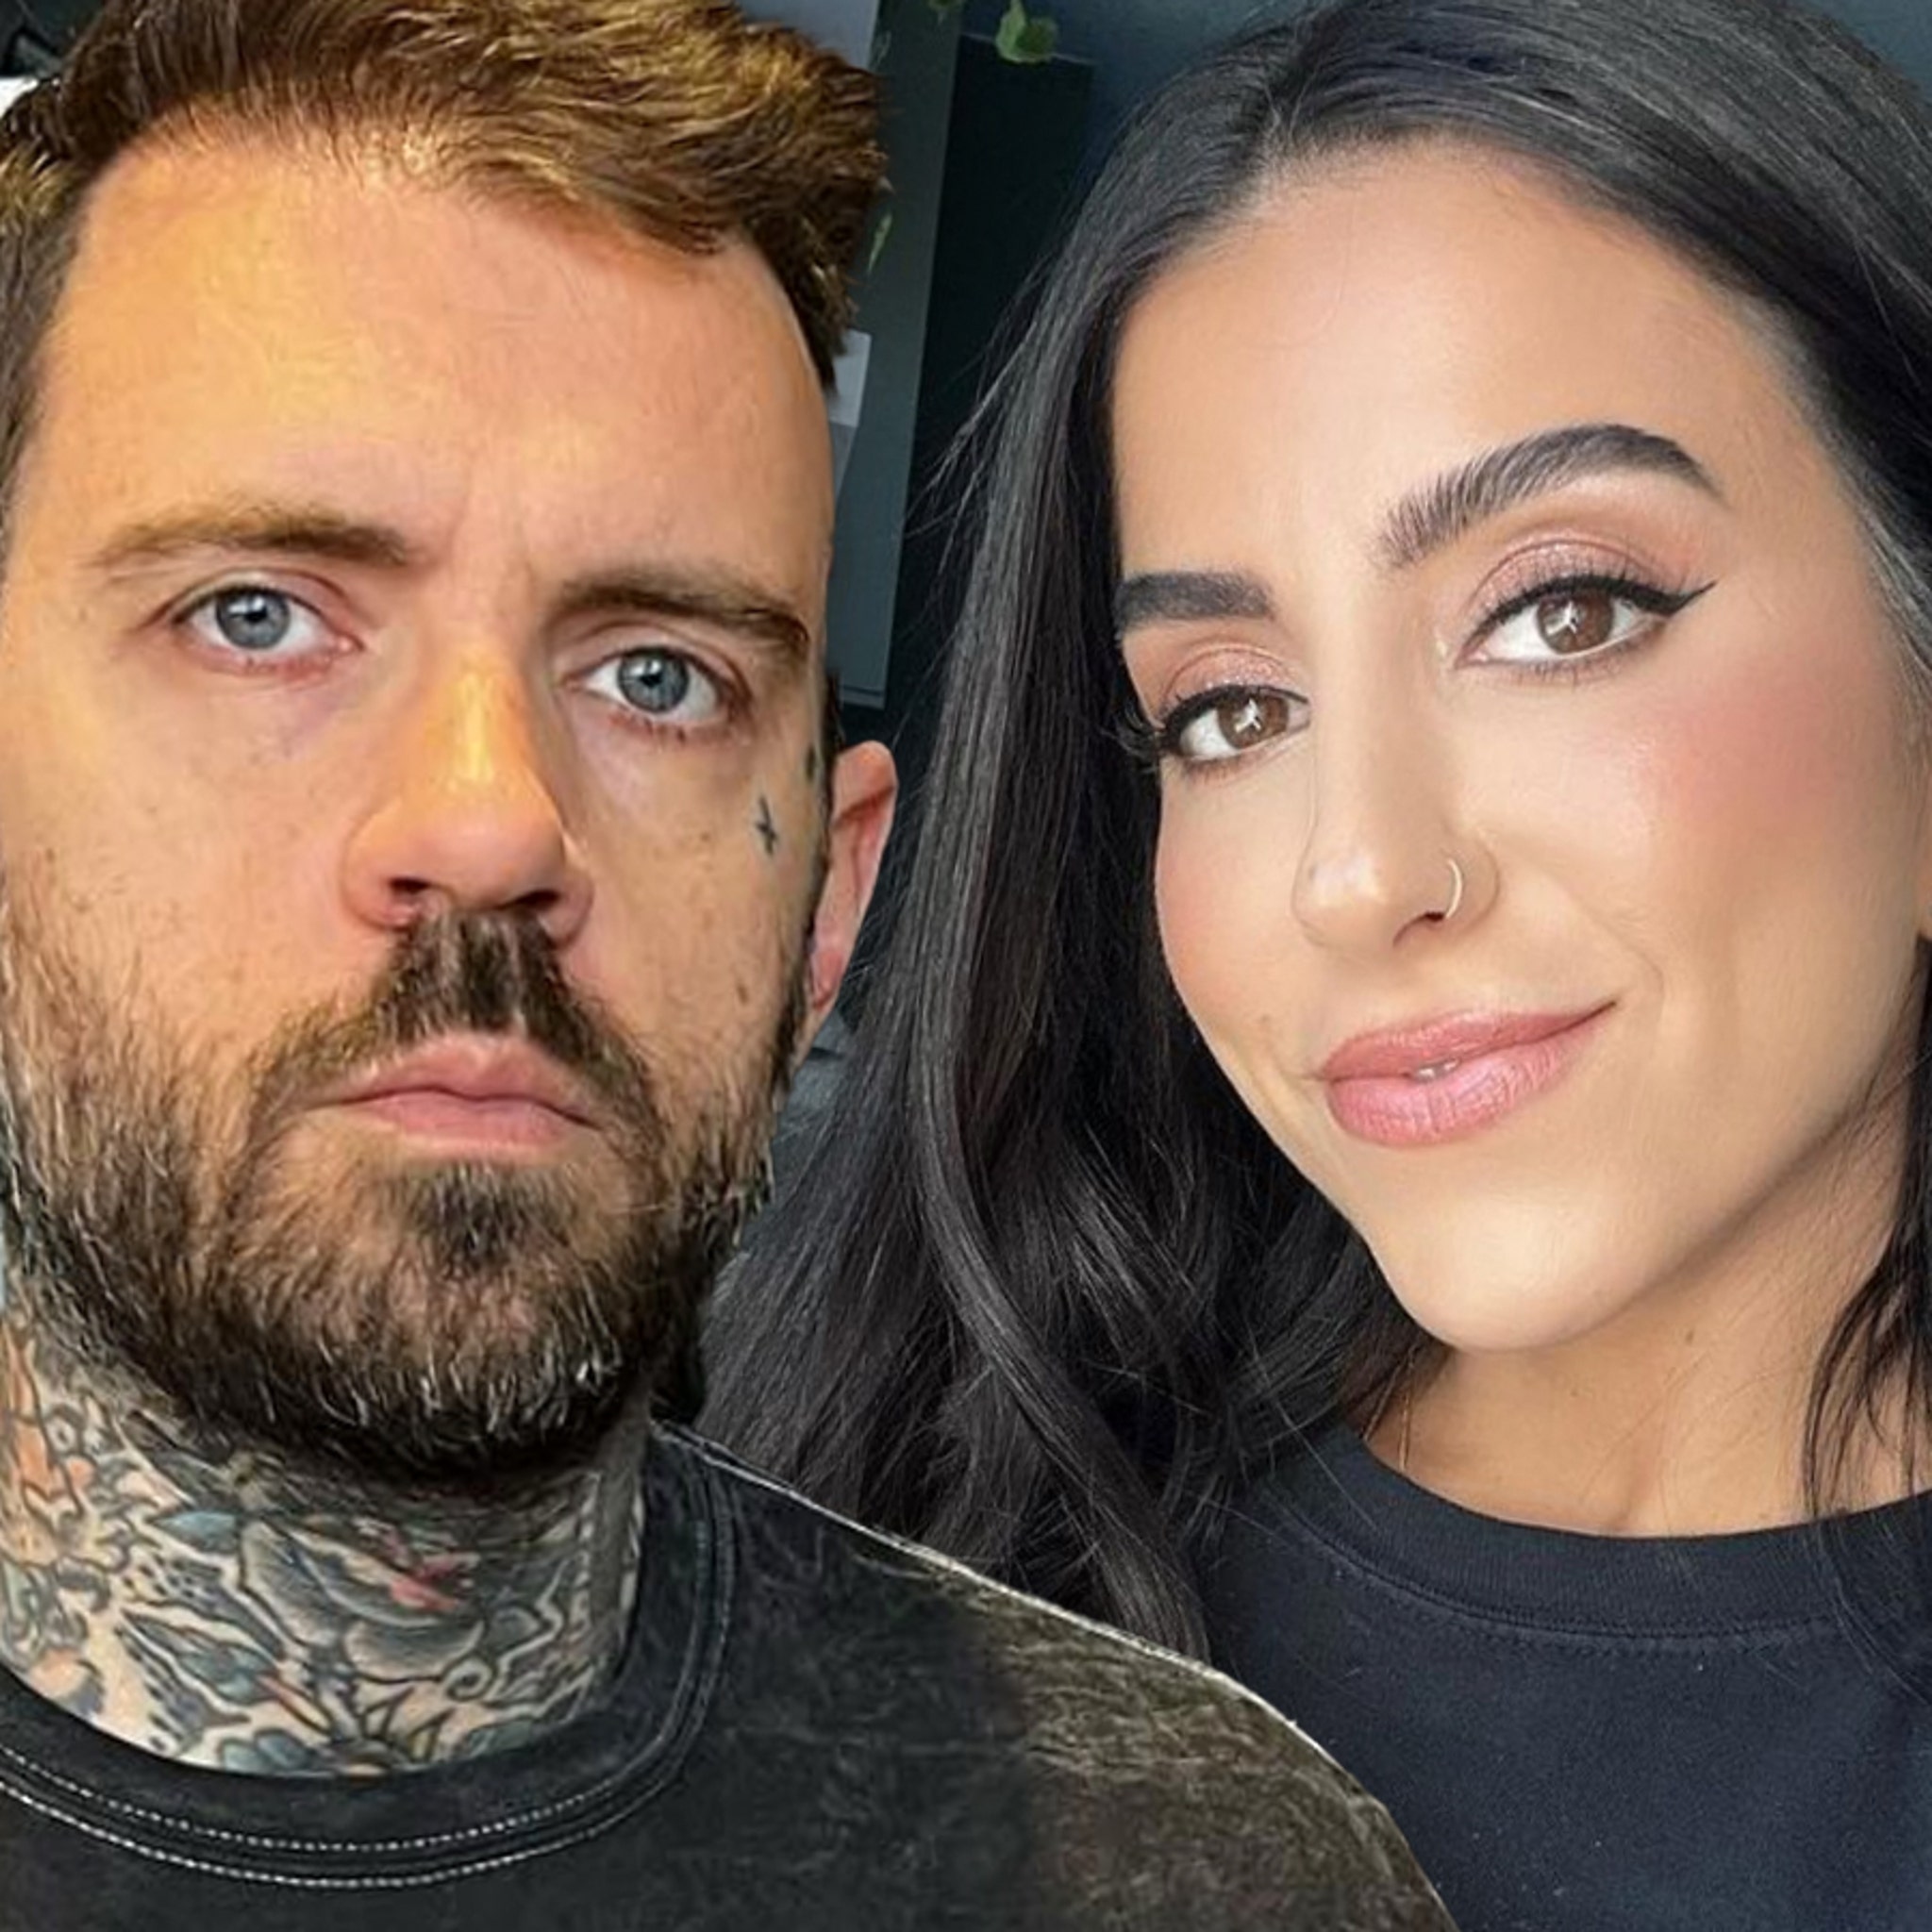 YouTuber Adam22 Fine With Wifes Porn Star Career After Getting Married pic picture